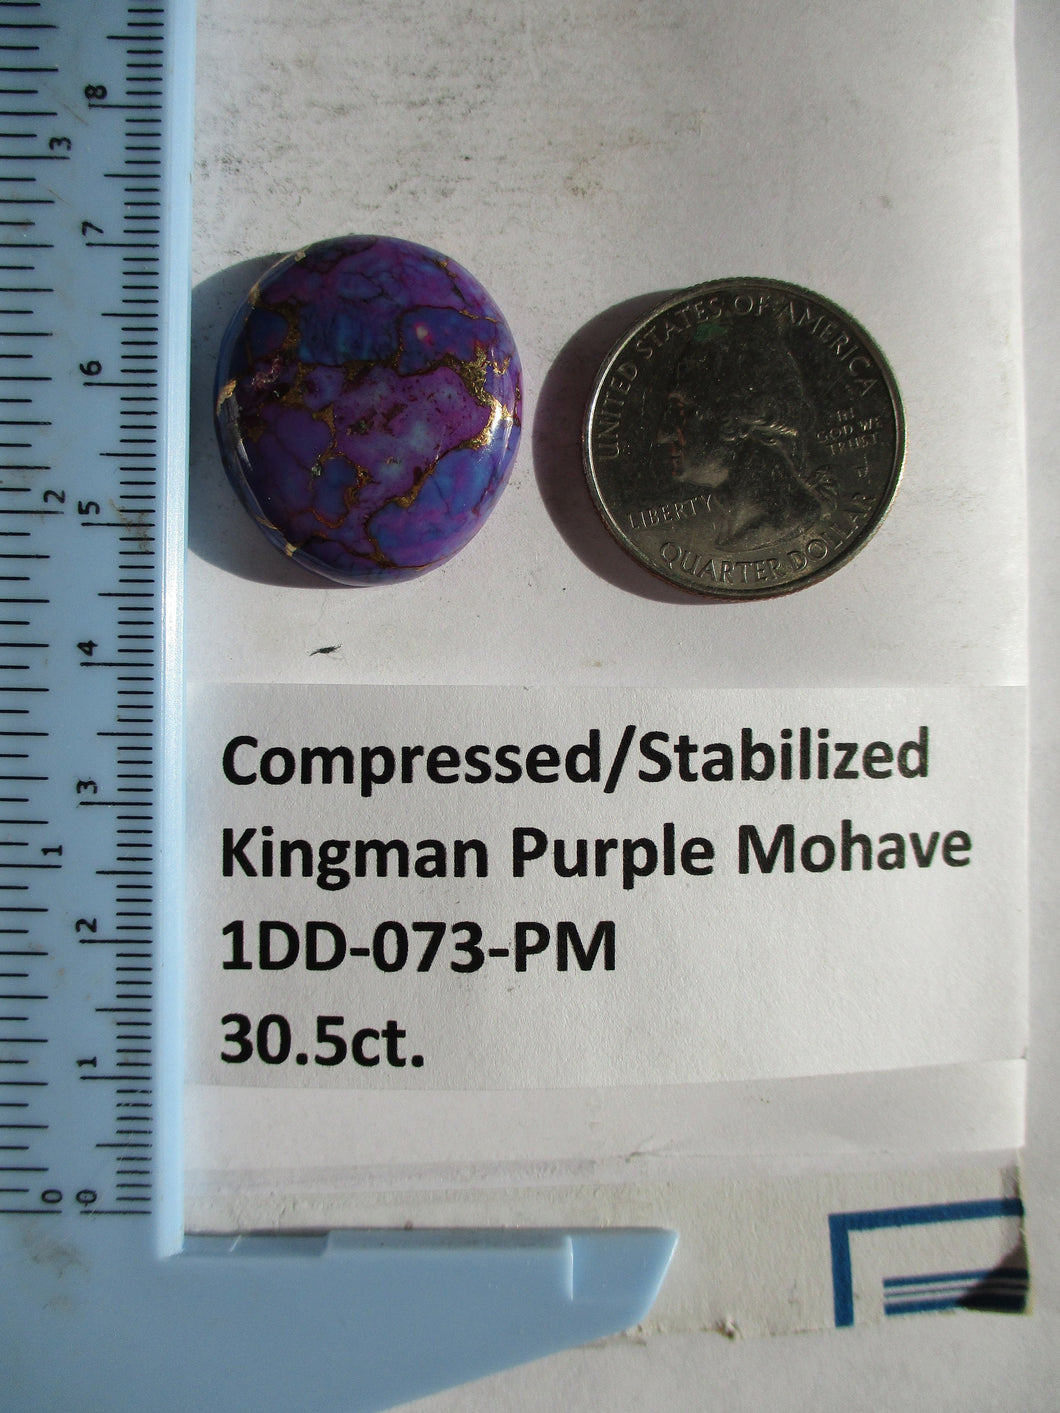 30.5 ct. (26x23x6 mm) Pressed/Dyed/Stabilized Kingman Purple Mohave Turquoise Gemstone 1DD 073